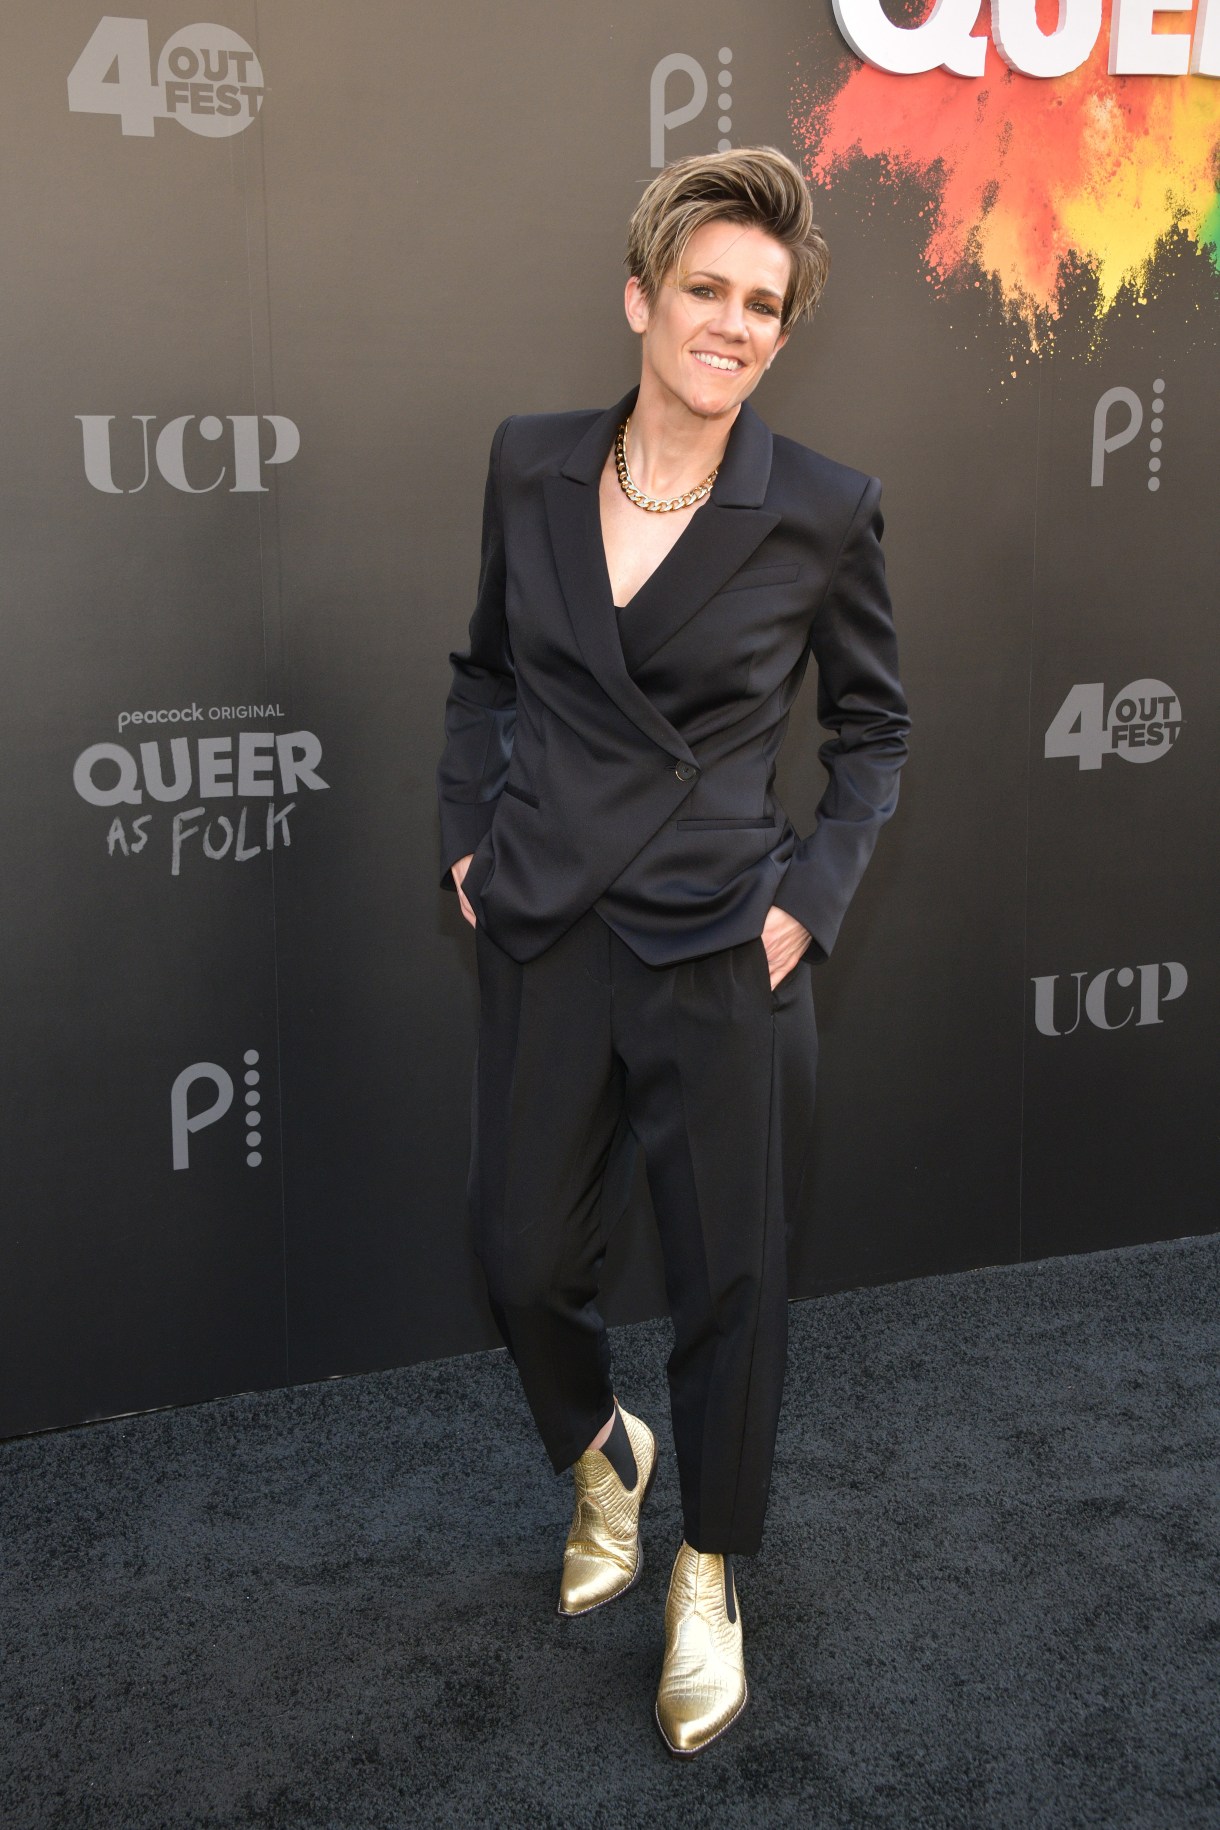 LOS ANGELES, CALIFORNIA - JUNE 03: Cameron Esposito attends Peacock's "Queer As Folk" World Premiere event in partnership with Outfest's OutFronts Festival at The Theatre at Ace Hotel on June 03, 2022 in Los Angeles, California. (Photo by Araya Doheny/FilmMagic)